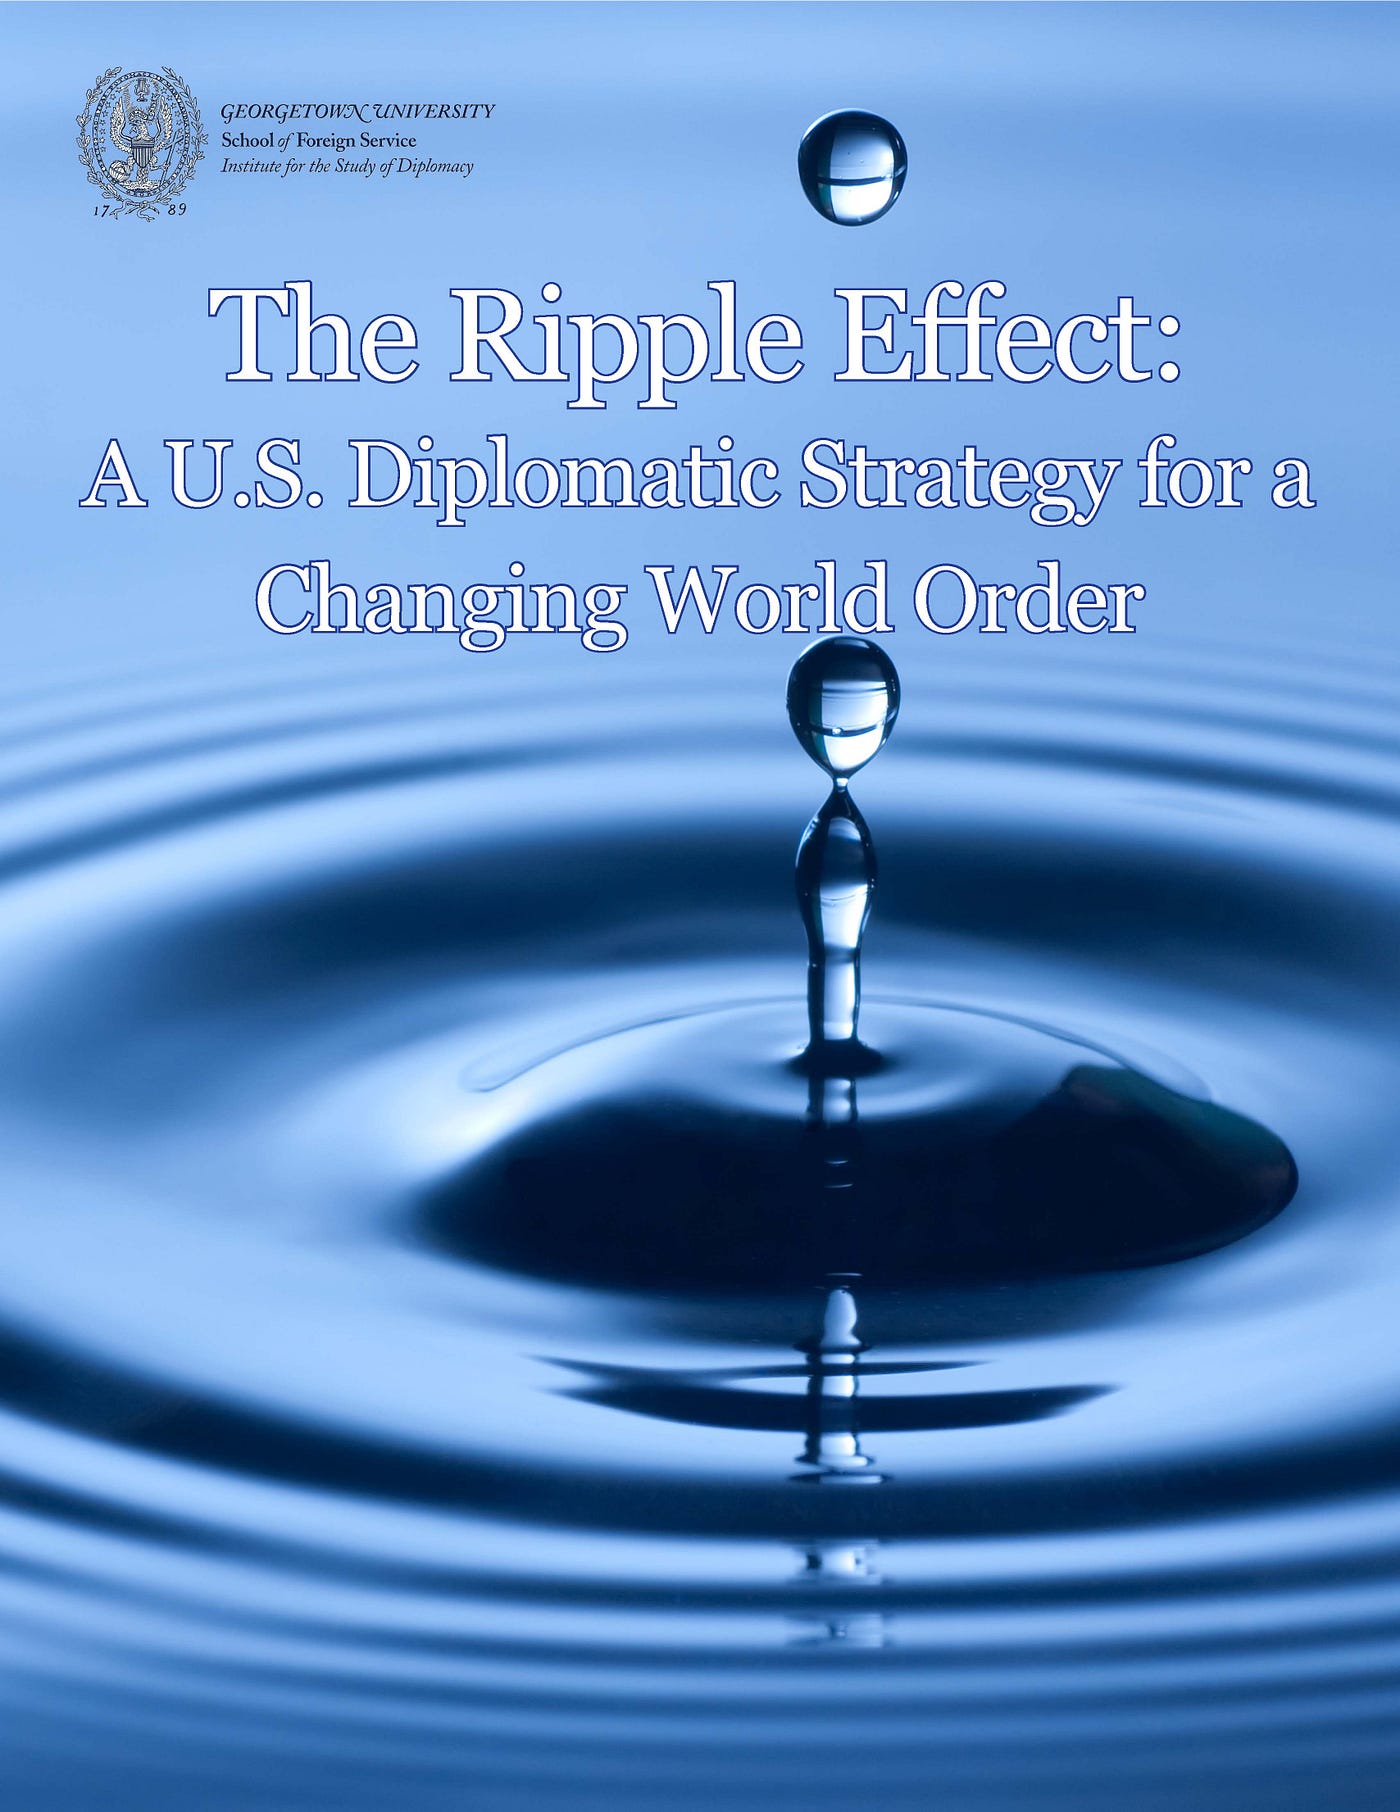 The Ripple Effect: A U.S. Diplomatic Strategy for a Changing World